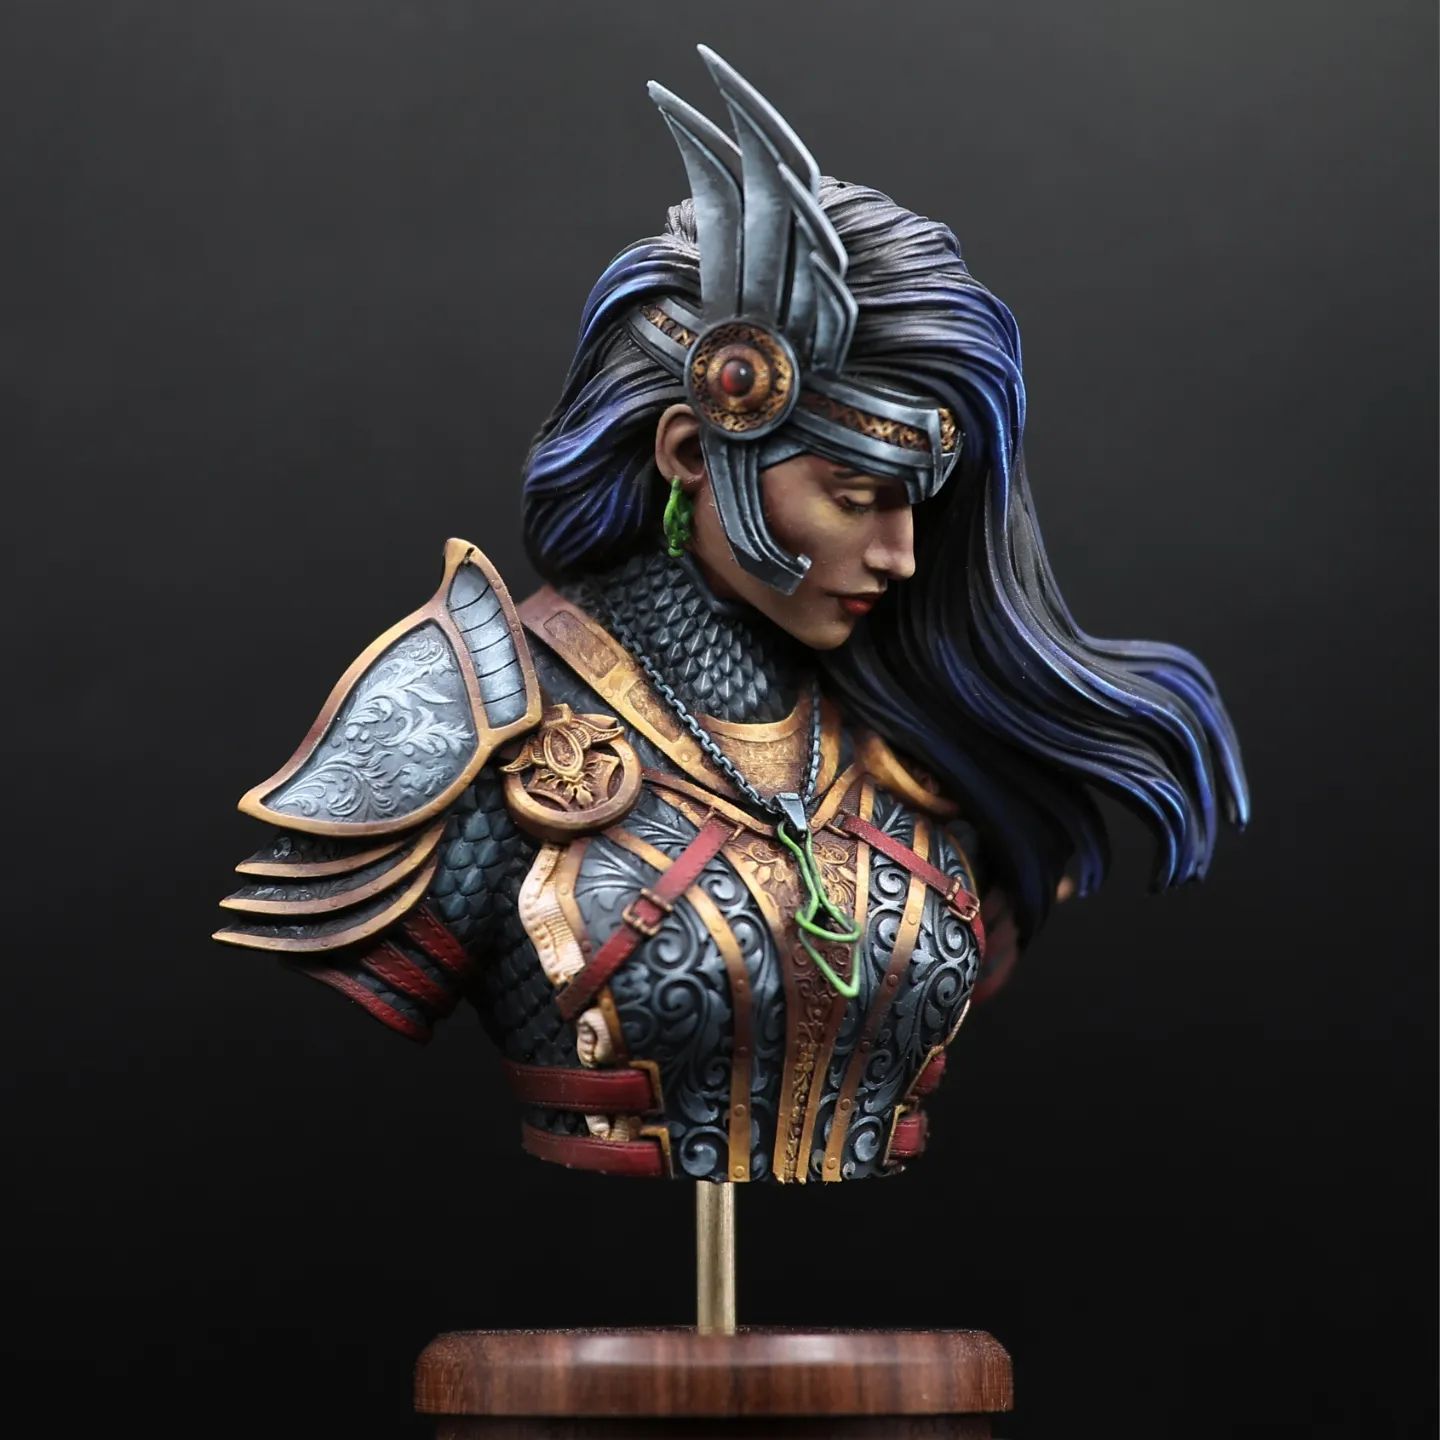 I finally finished It!  Revna bust, theres an actual miniature of this zi might get someday. Made a plinth this morning for it ill post another time. #revna #bust #Nerikson #Valkyrie #angel #warrior #dnd #fantasy #rpg #female #miniature #miniaturepainting #miniatures #nmm #gold #steel #nonmetallicmetal #armor #armour @nerikson91